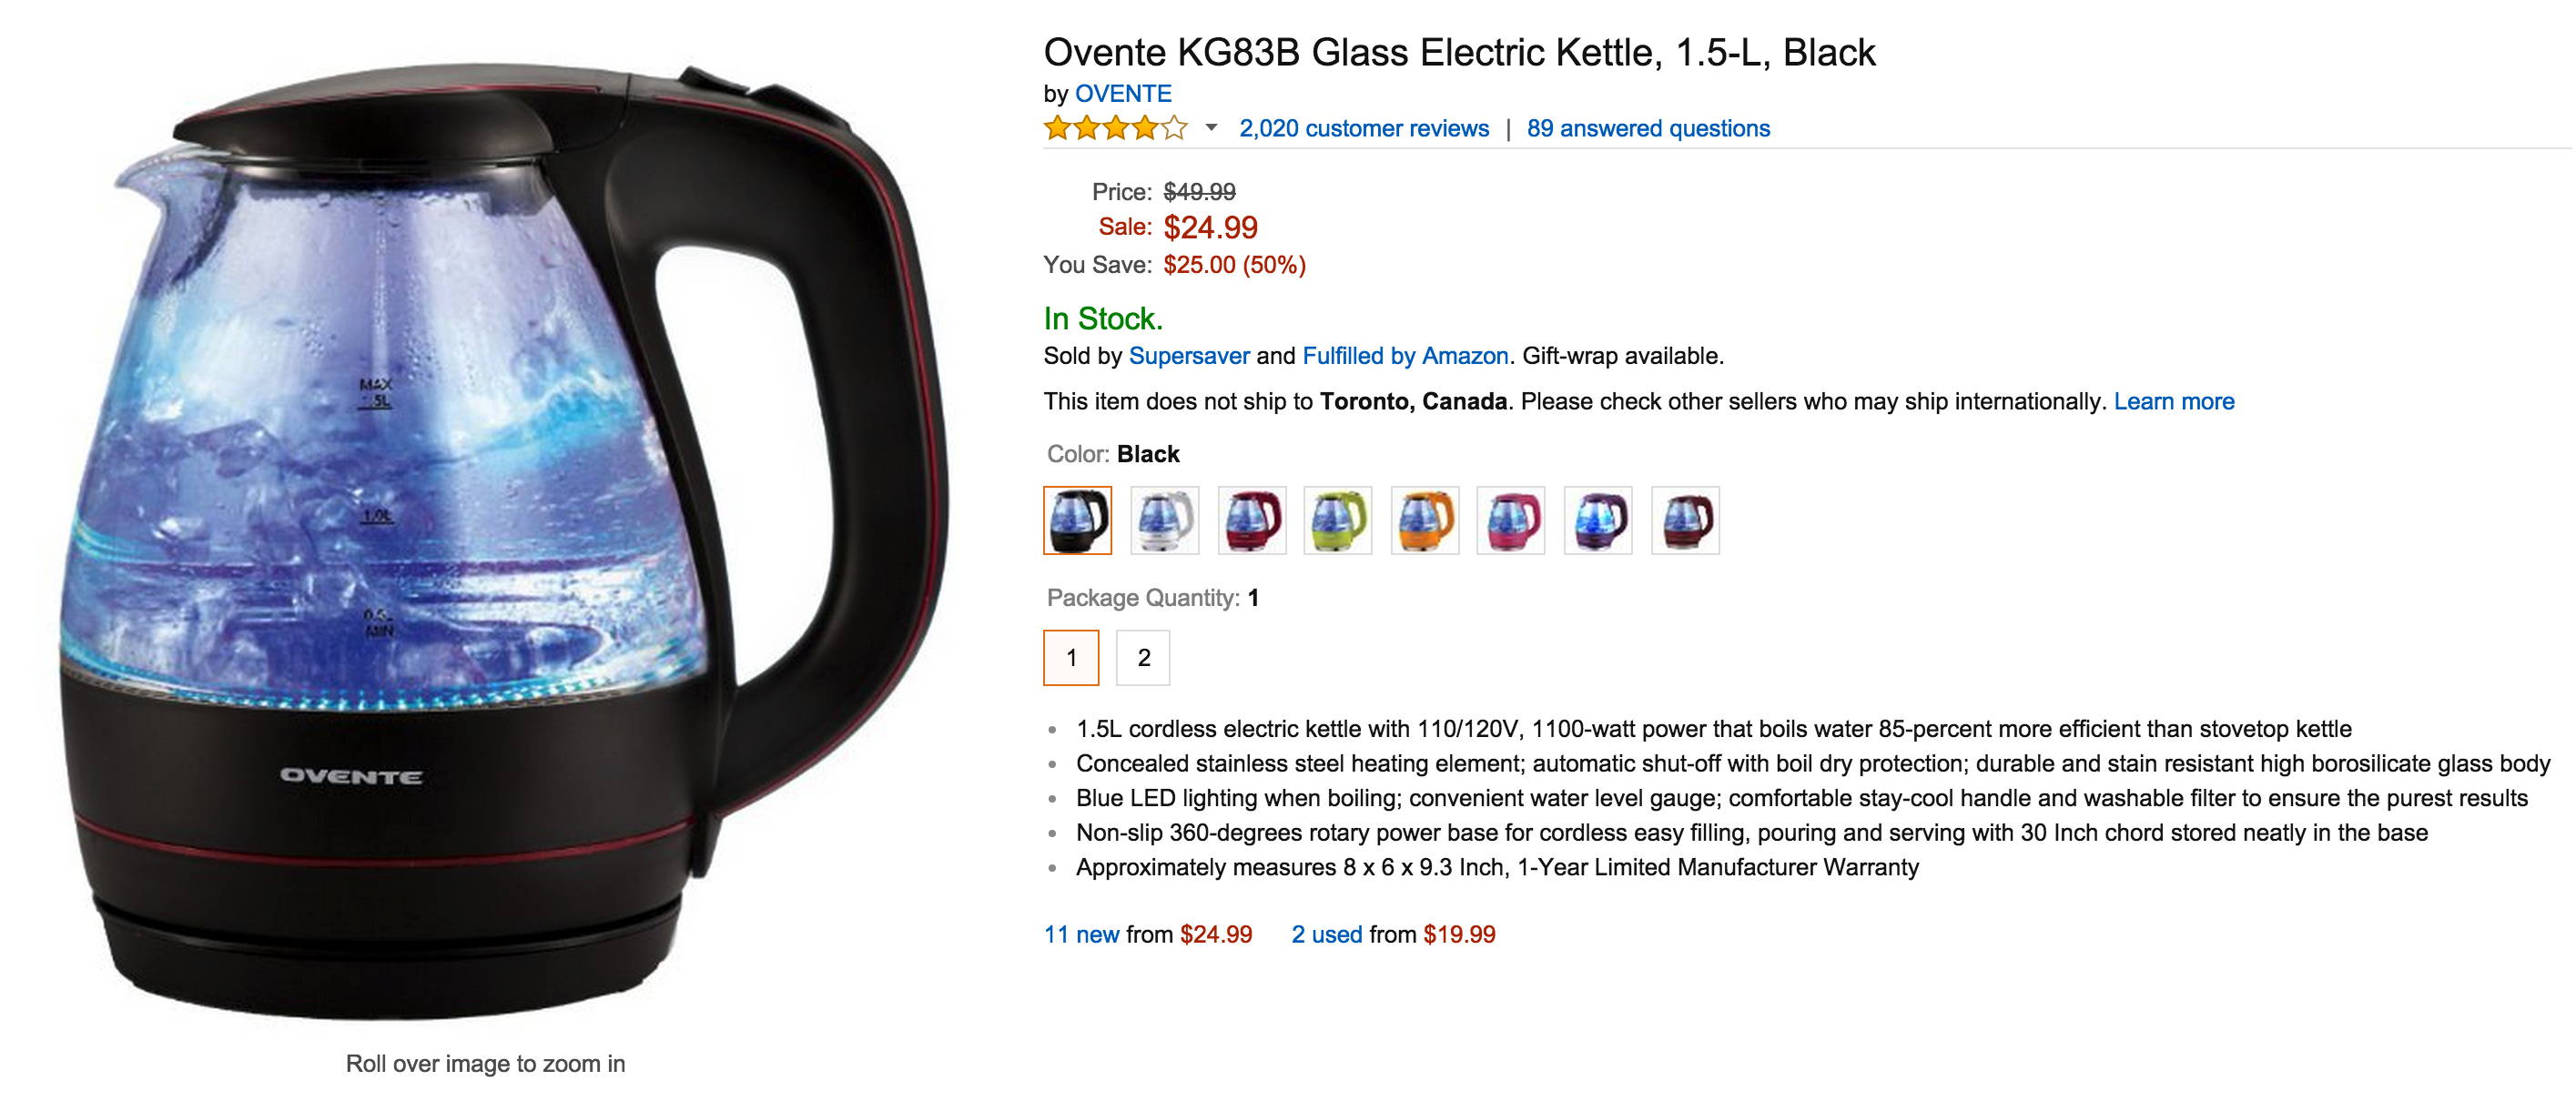 https://9to5toys.com/wp-content/uploads/sites/5/2015/07/ovente-glass-electric-kettle-kg83b-sale-02.png